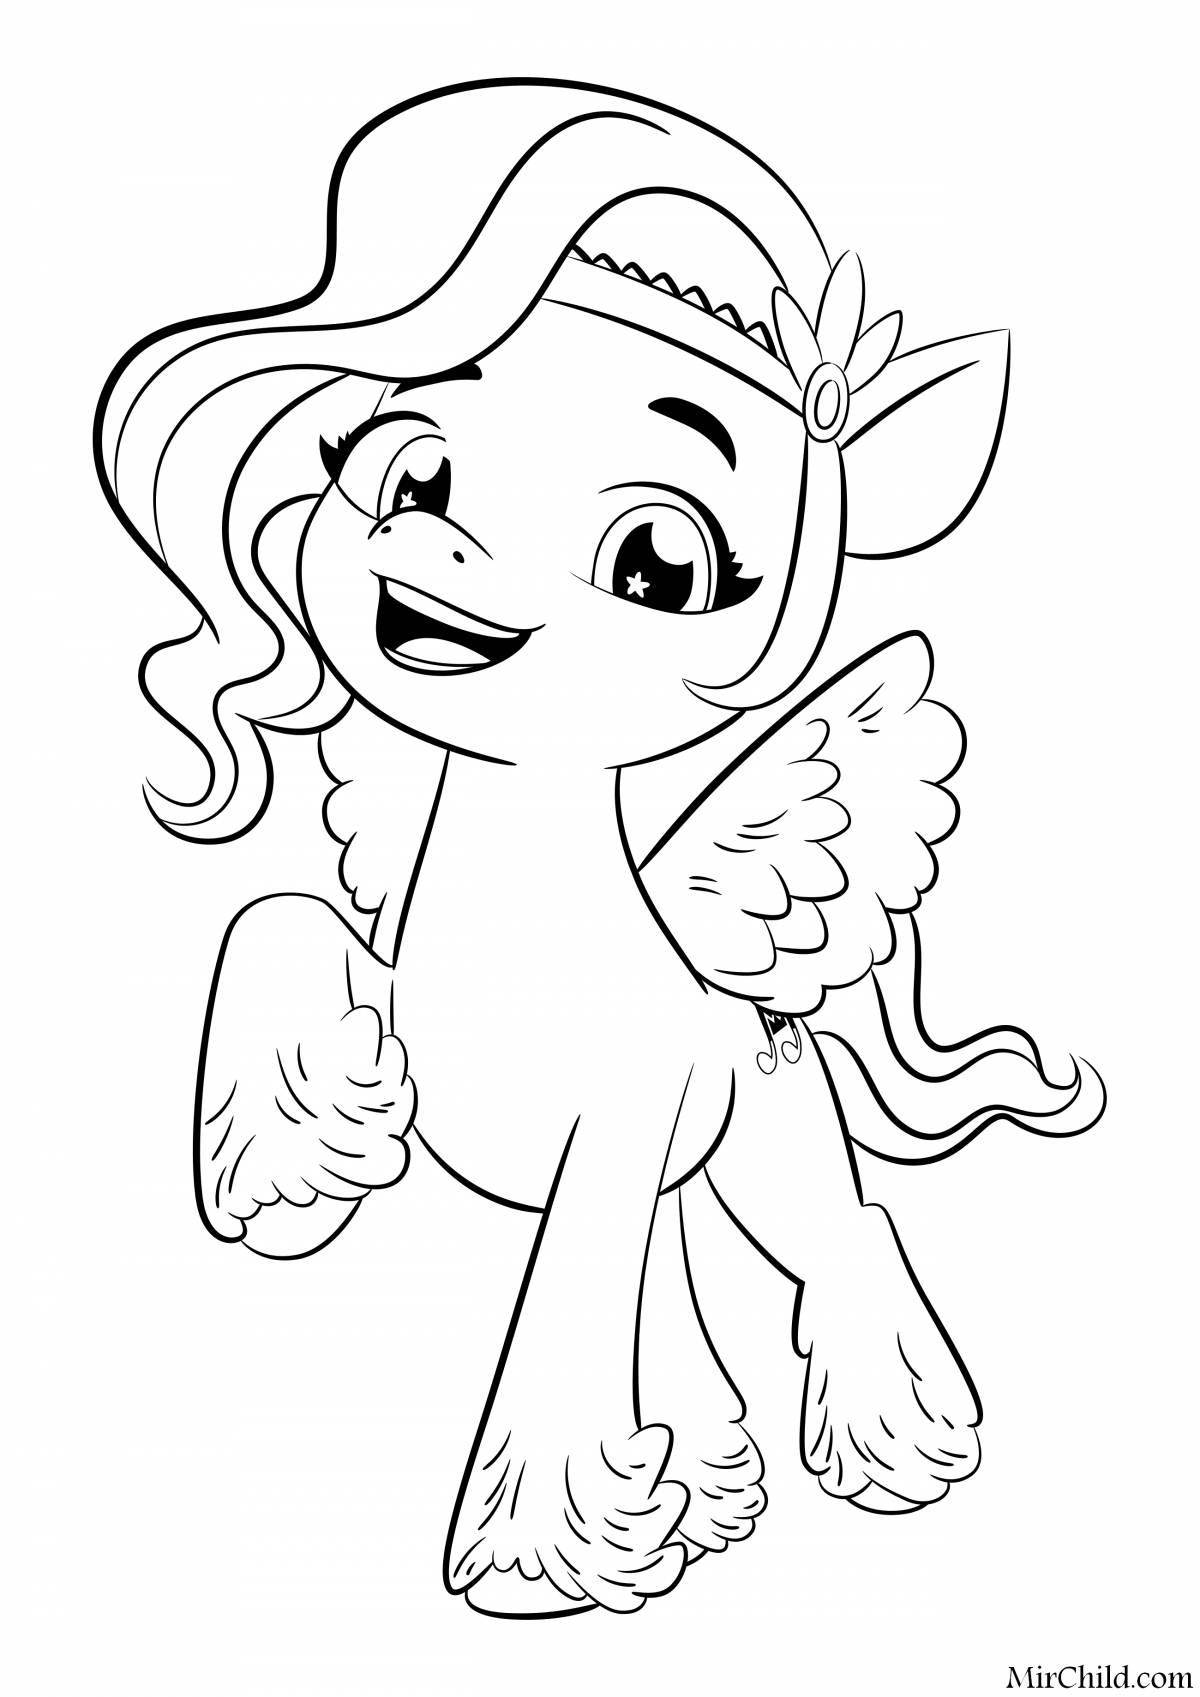 Colorful easy pony coloring page